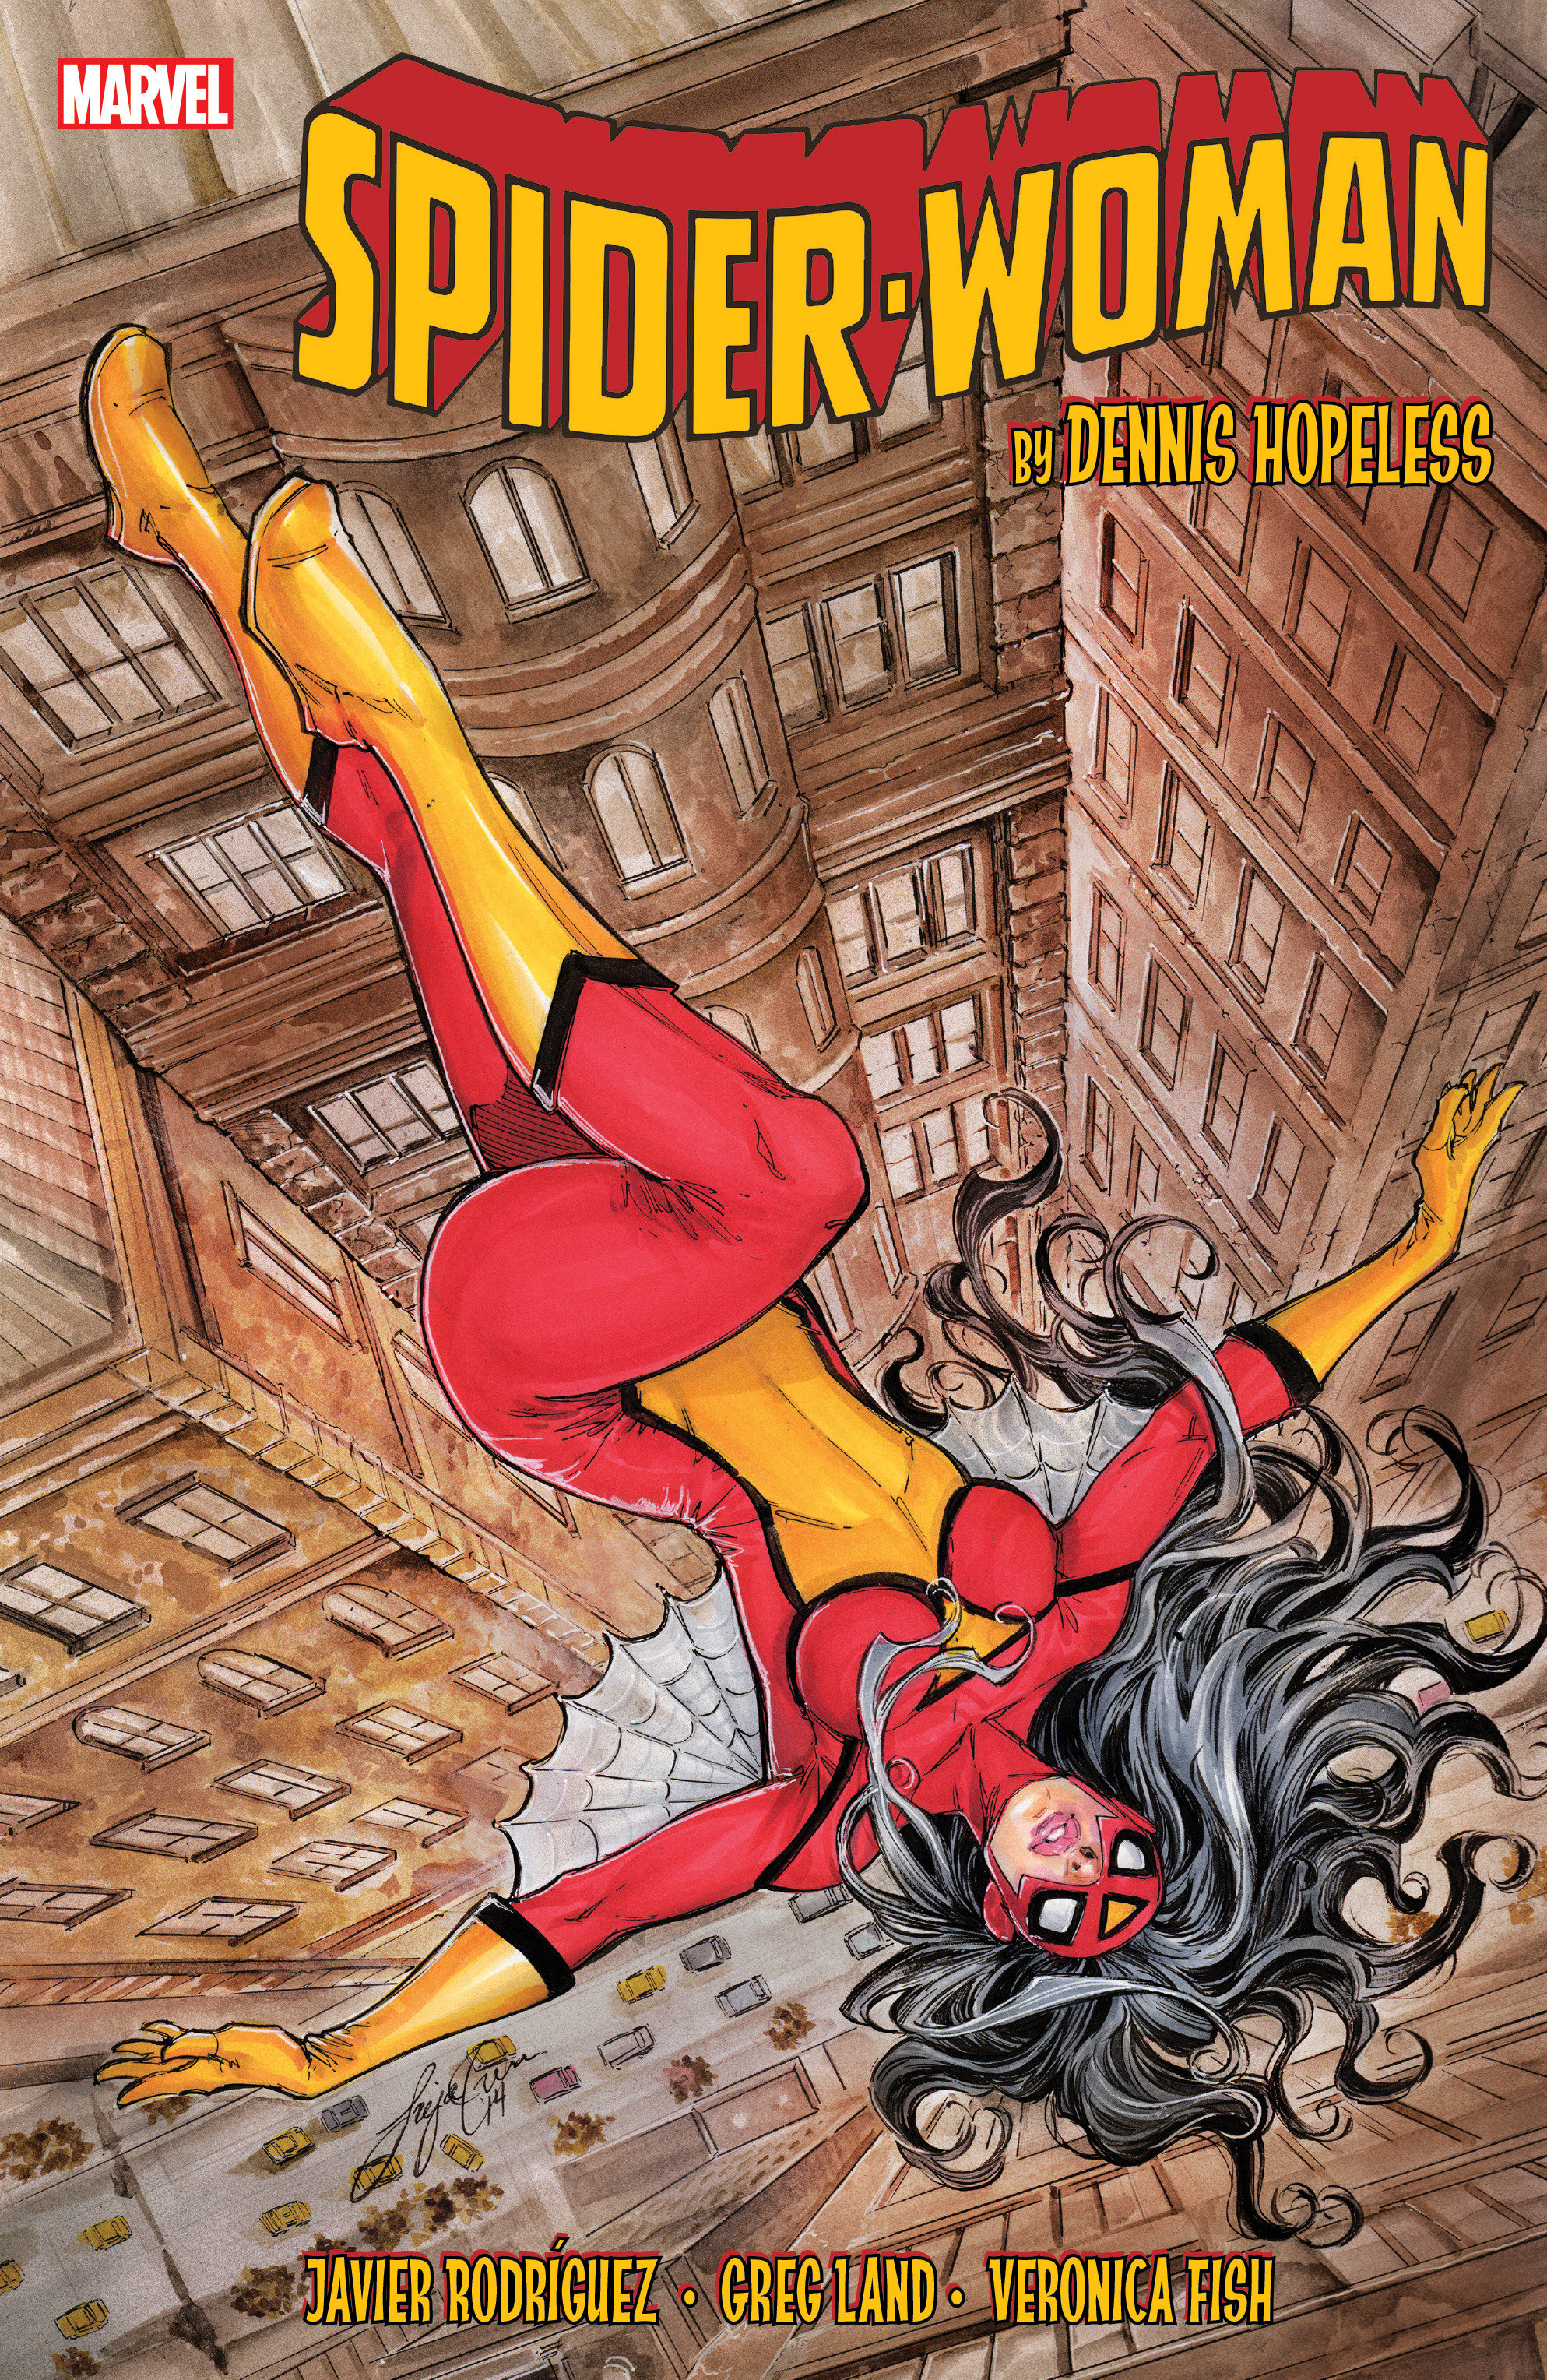 Spider-Woman by Dennis Hopeless Graphic Novel